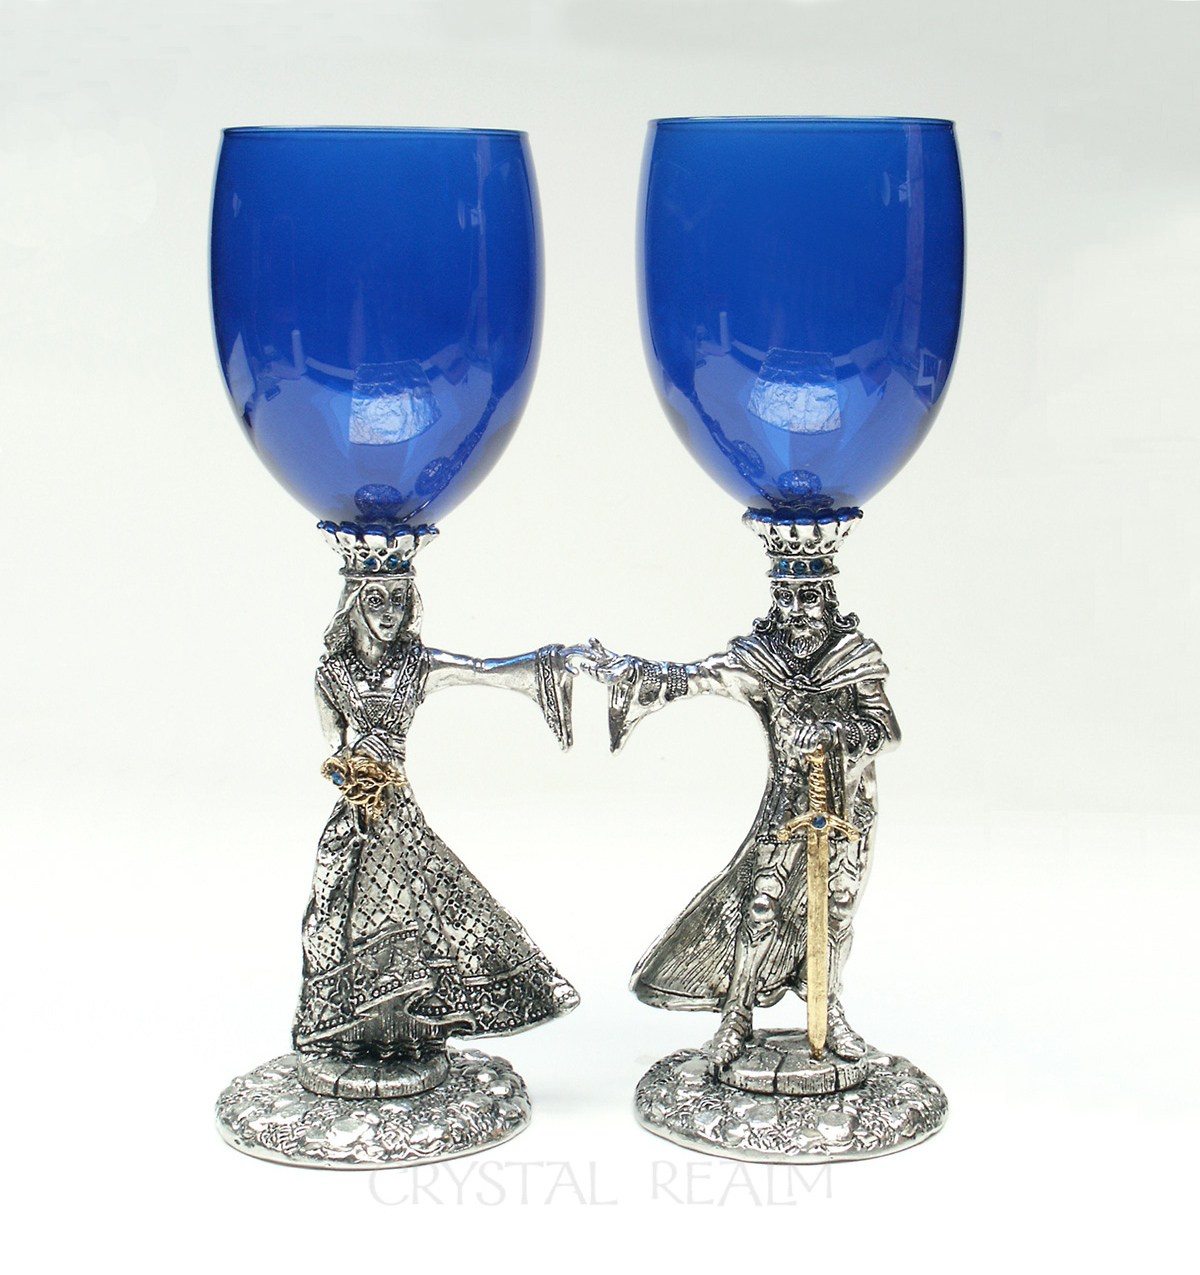 Arthur and Guinevere blue toasting glasses with Austrian crystal and 23k gold trim